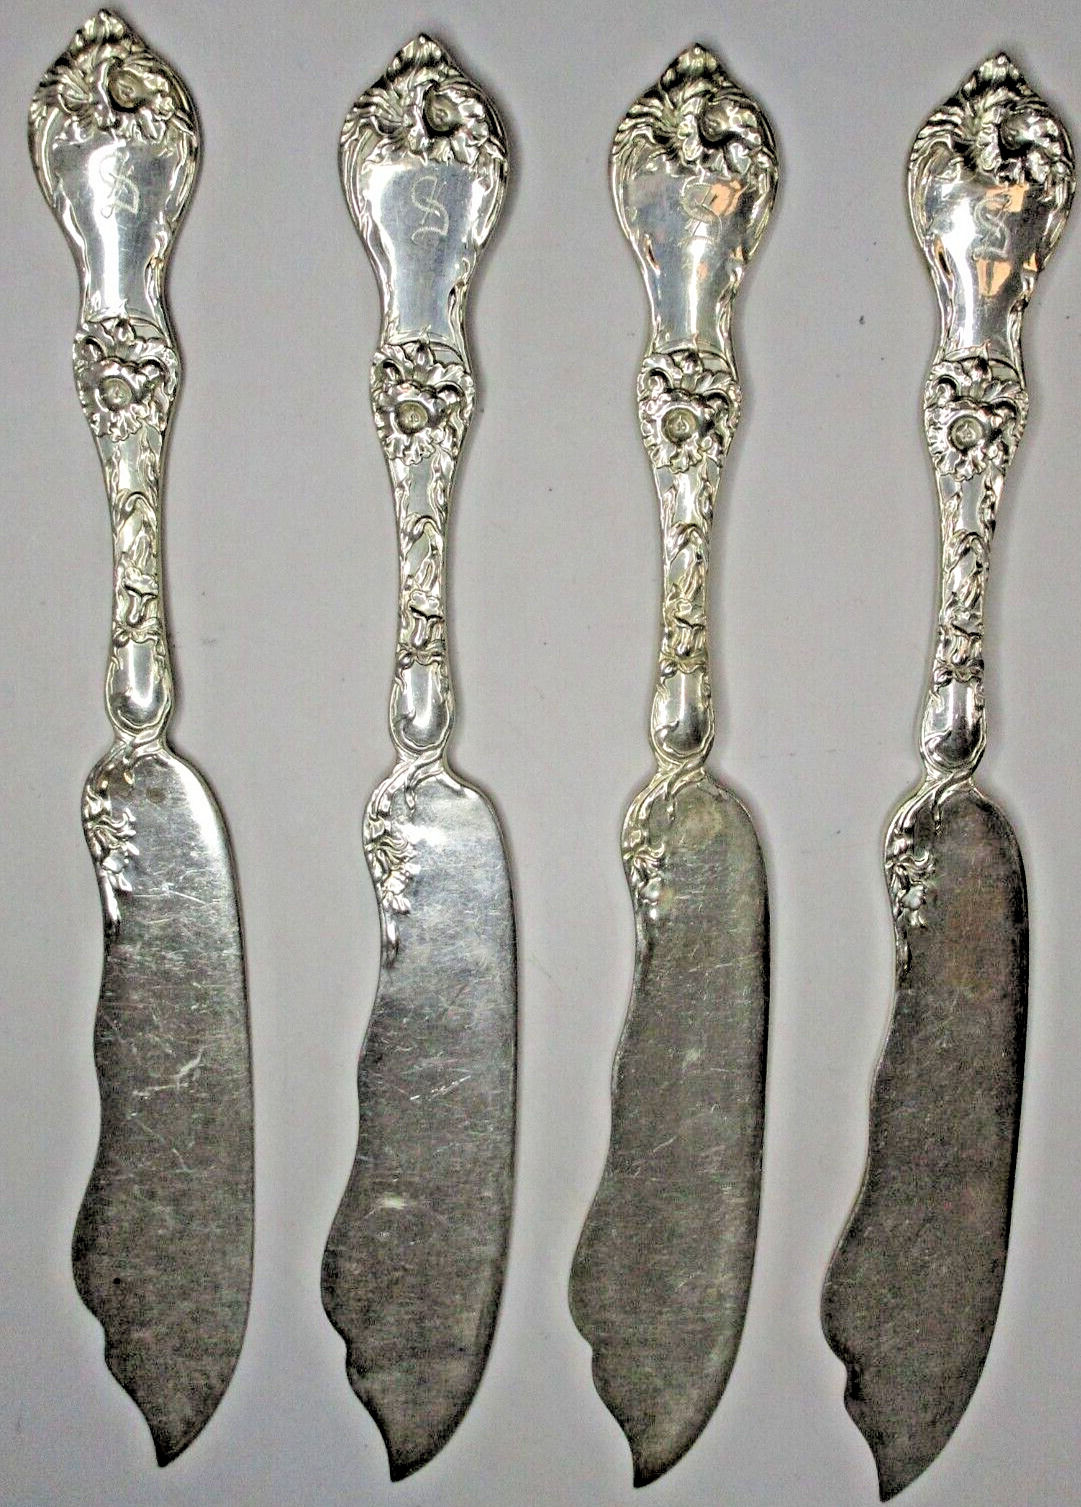 ANTIQUE STERLING SILVER REED & BARTON LES CINQ FLEURS FISH KNIVES 8.25 IN SET/4